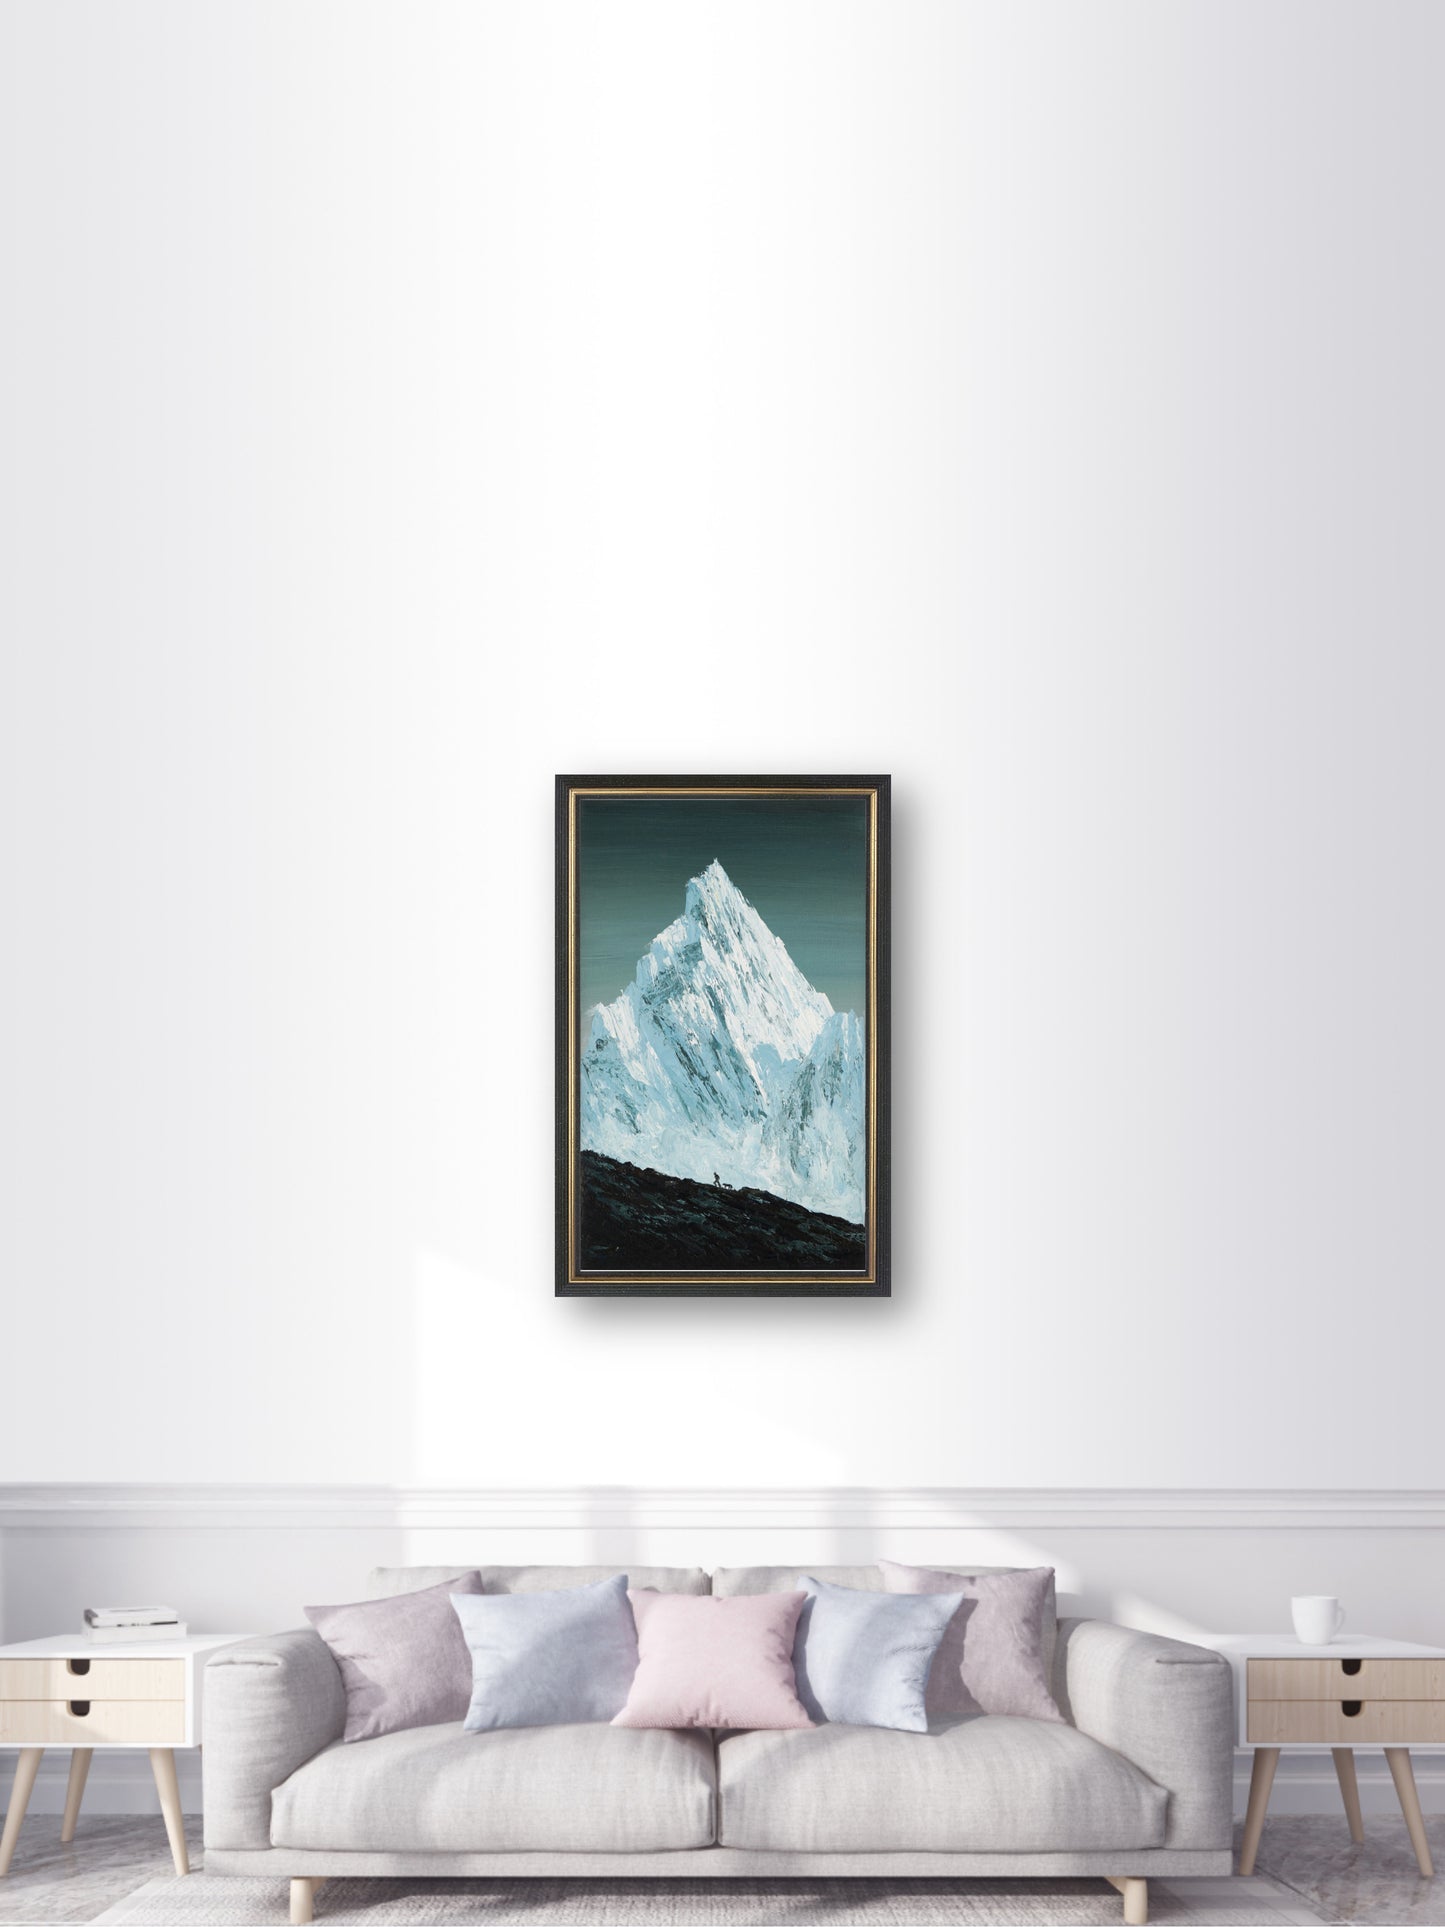 iceberg - “Oil painting” - painting for Room - 19.7x11.8 Inches - [Nicola0012]